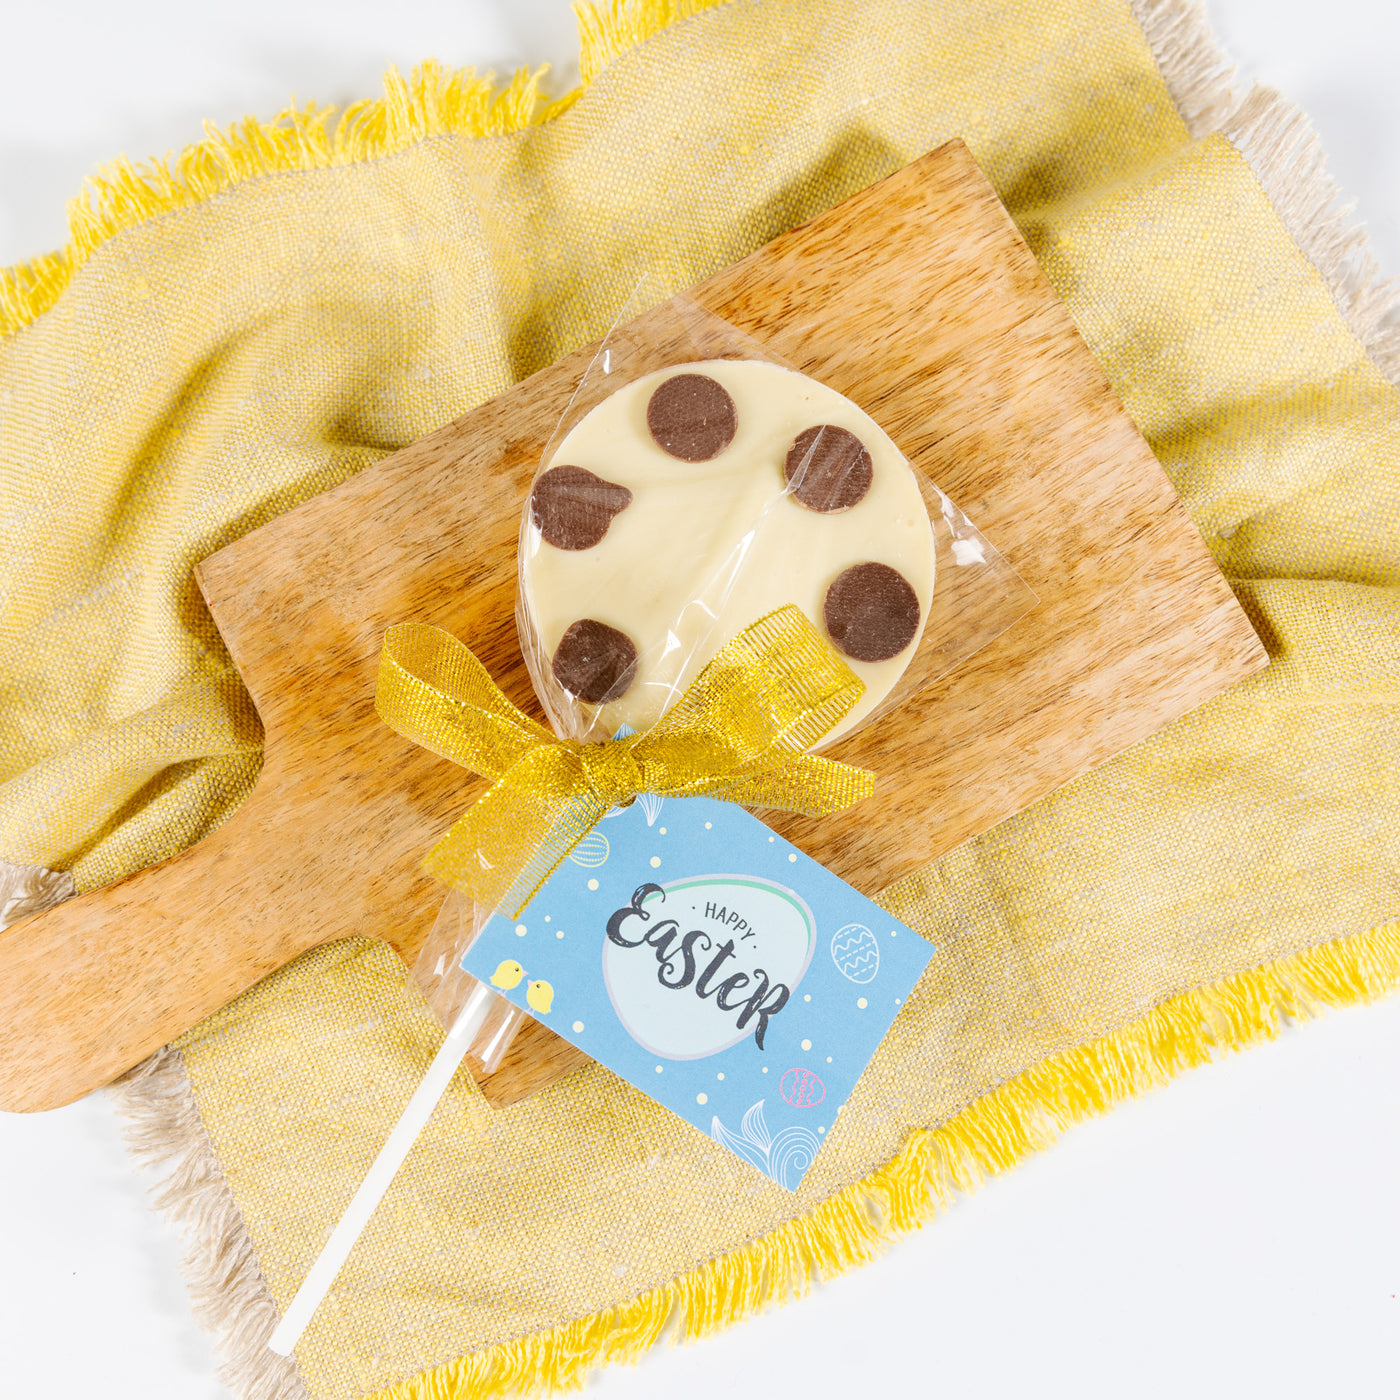 Luxury White & Milk Chocolate Easter Lolly